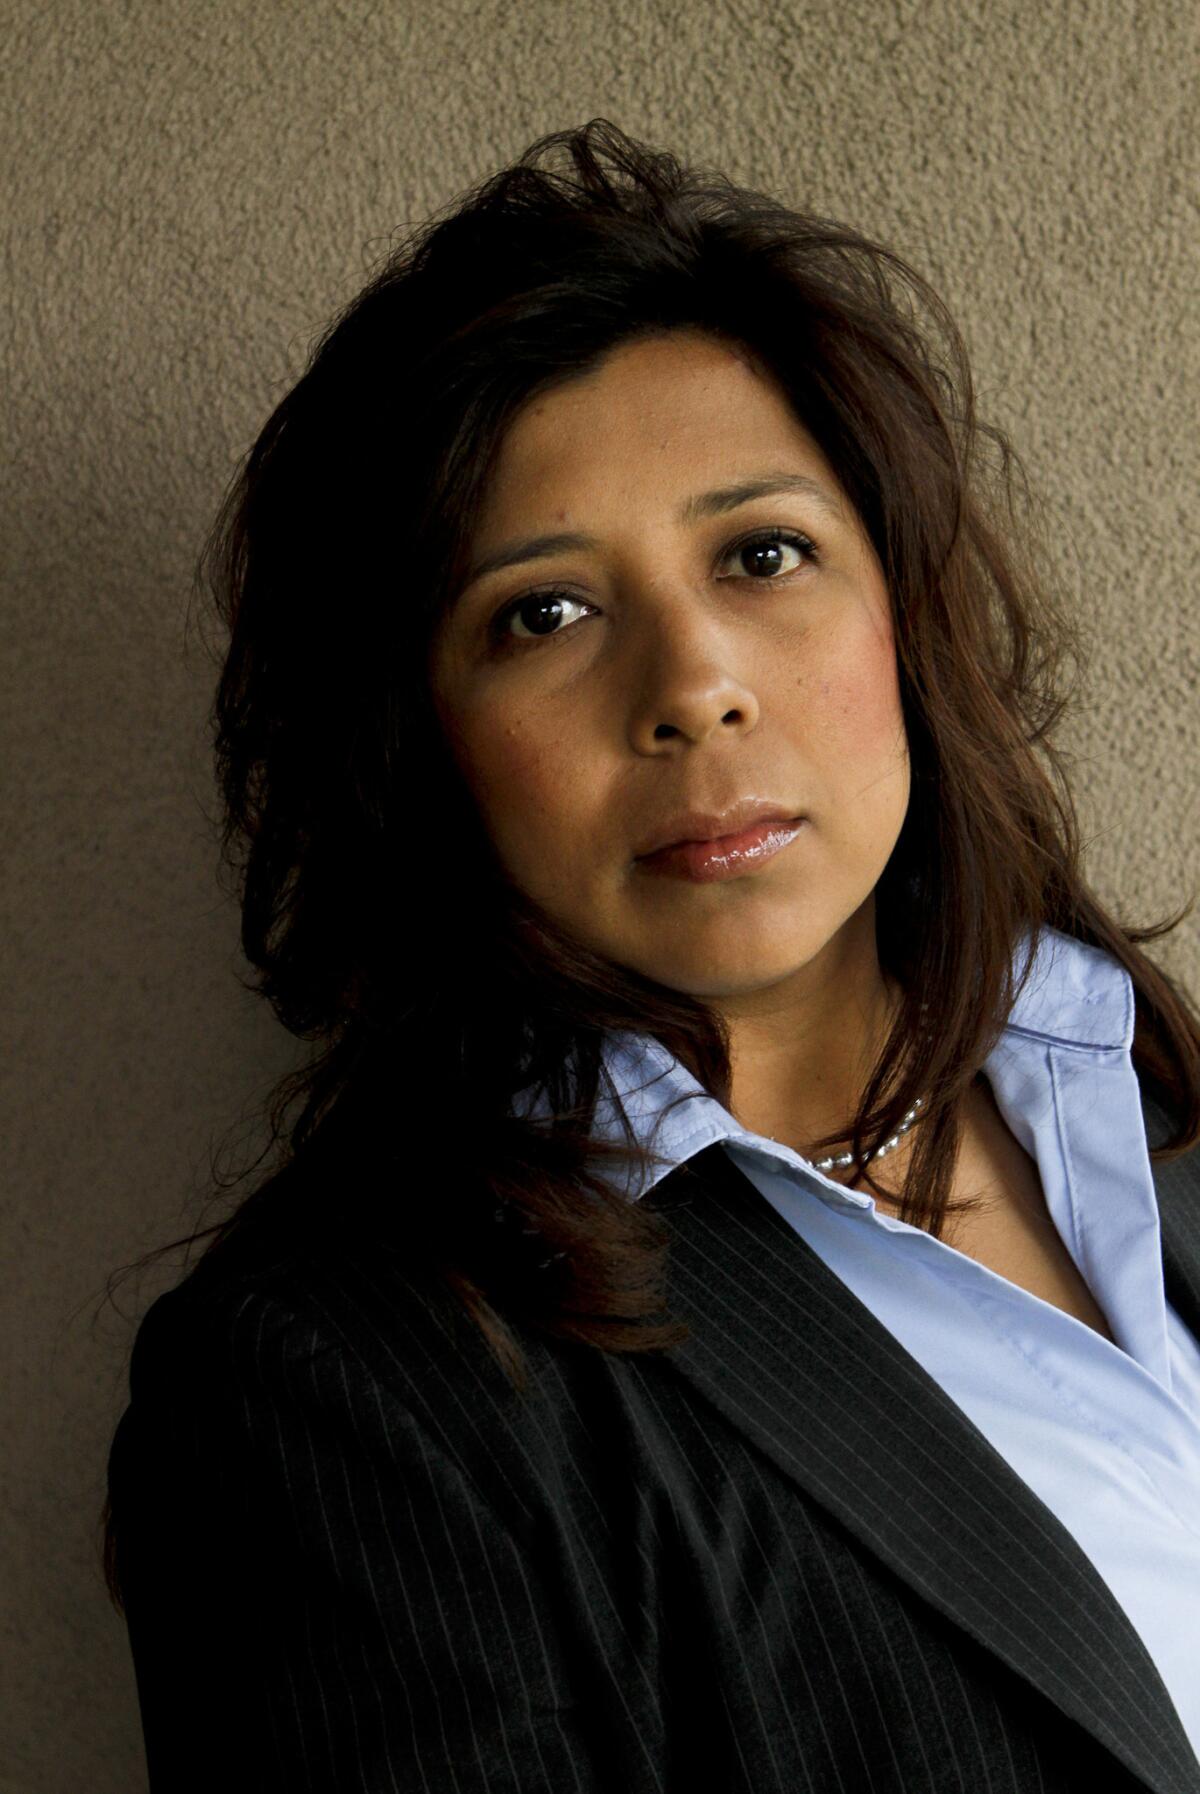 Montebello Mayor Christina Cortez, shown in 2011. She said after her husband's arrest that she "would urge everyone and the public to let this investigation take its course."